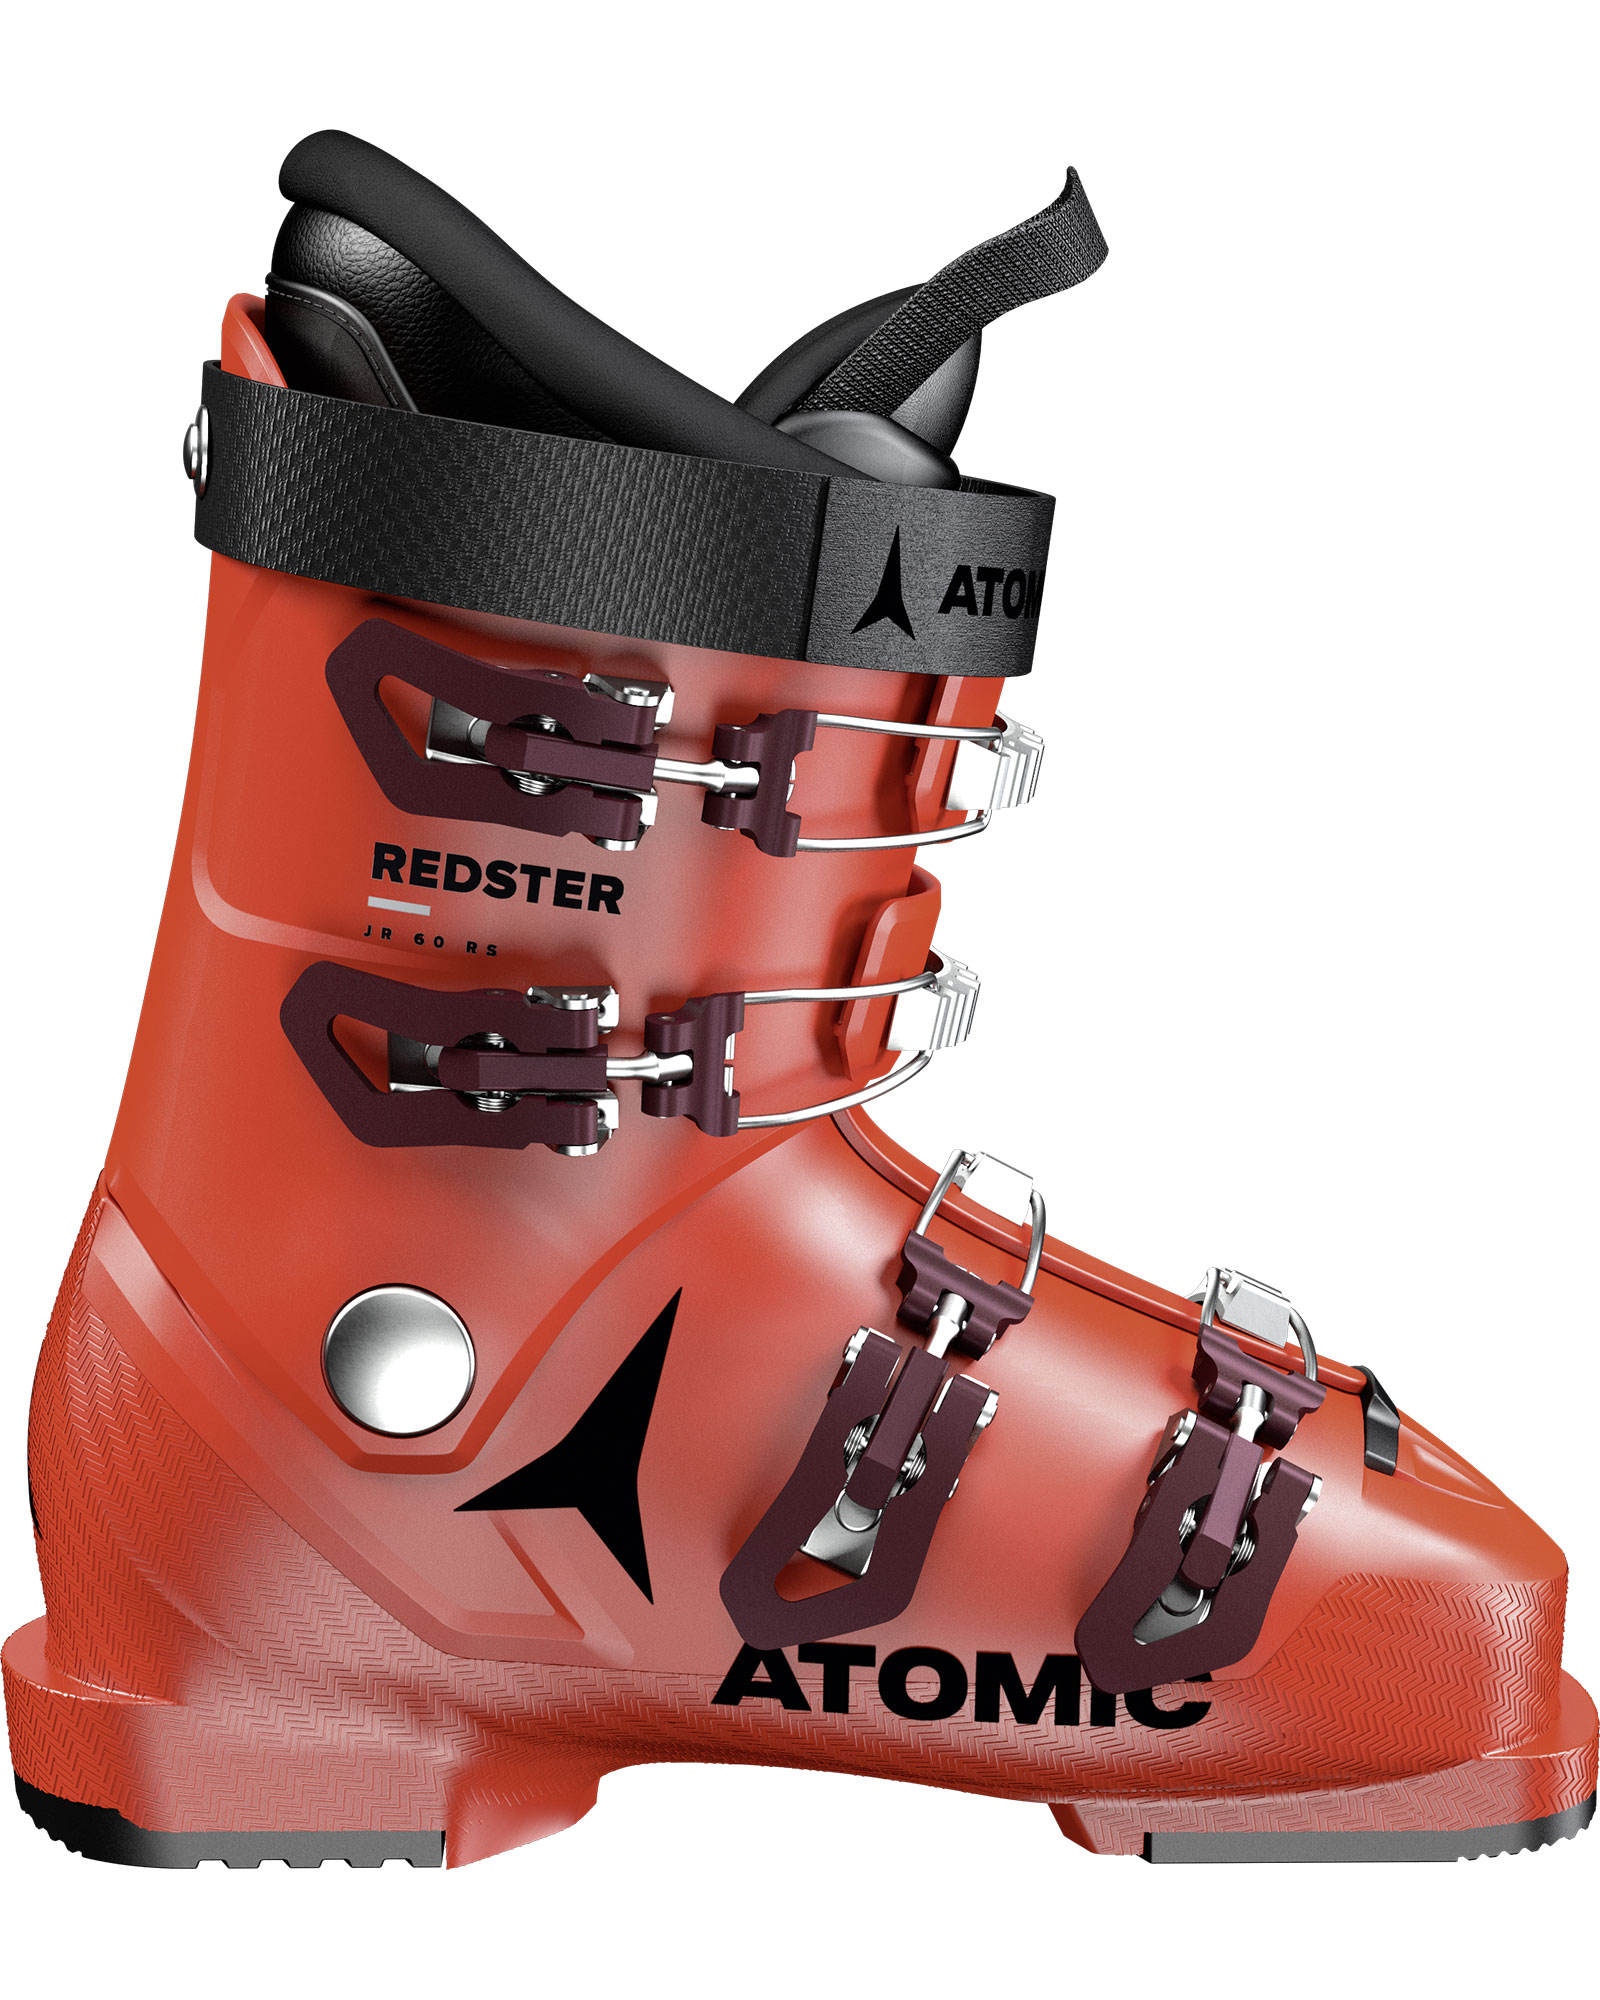 Atomic Redster JR 60 RS (Size 25.0 and over) Youth Ski Boots 2024 MP 25.0